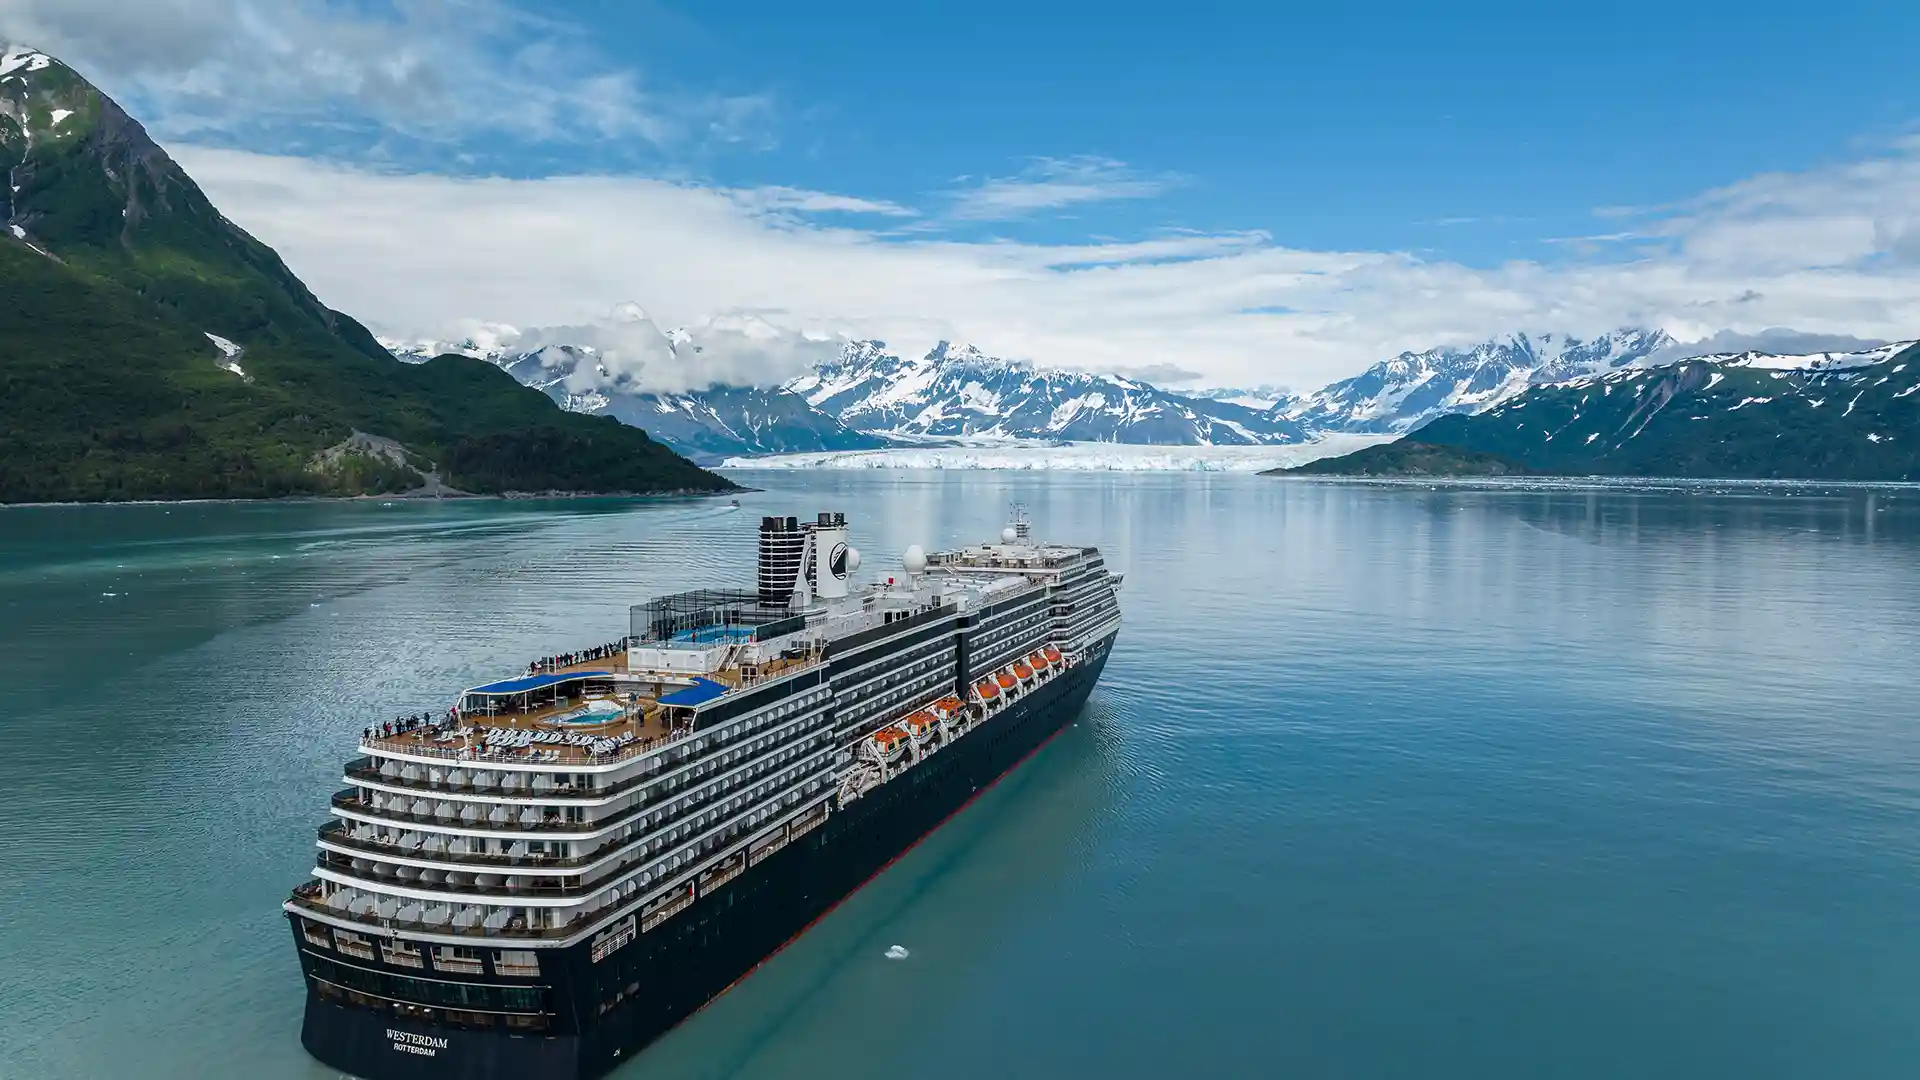 View of Holland America Line cruise ship in Alaska surrounded by snowcapped mountains.